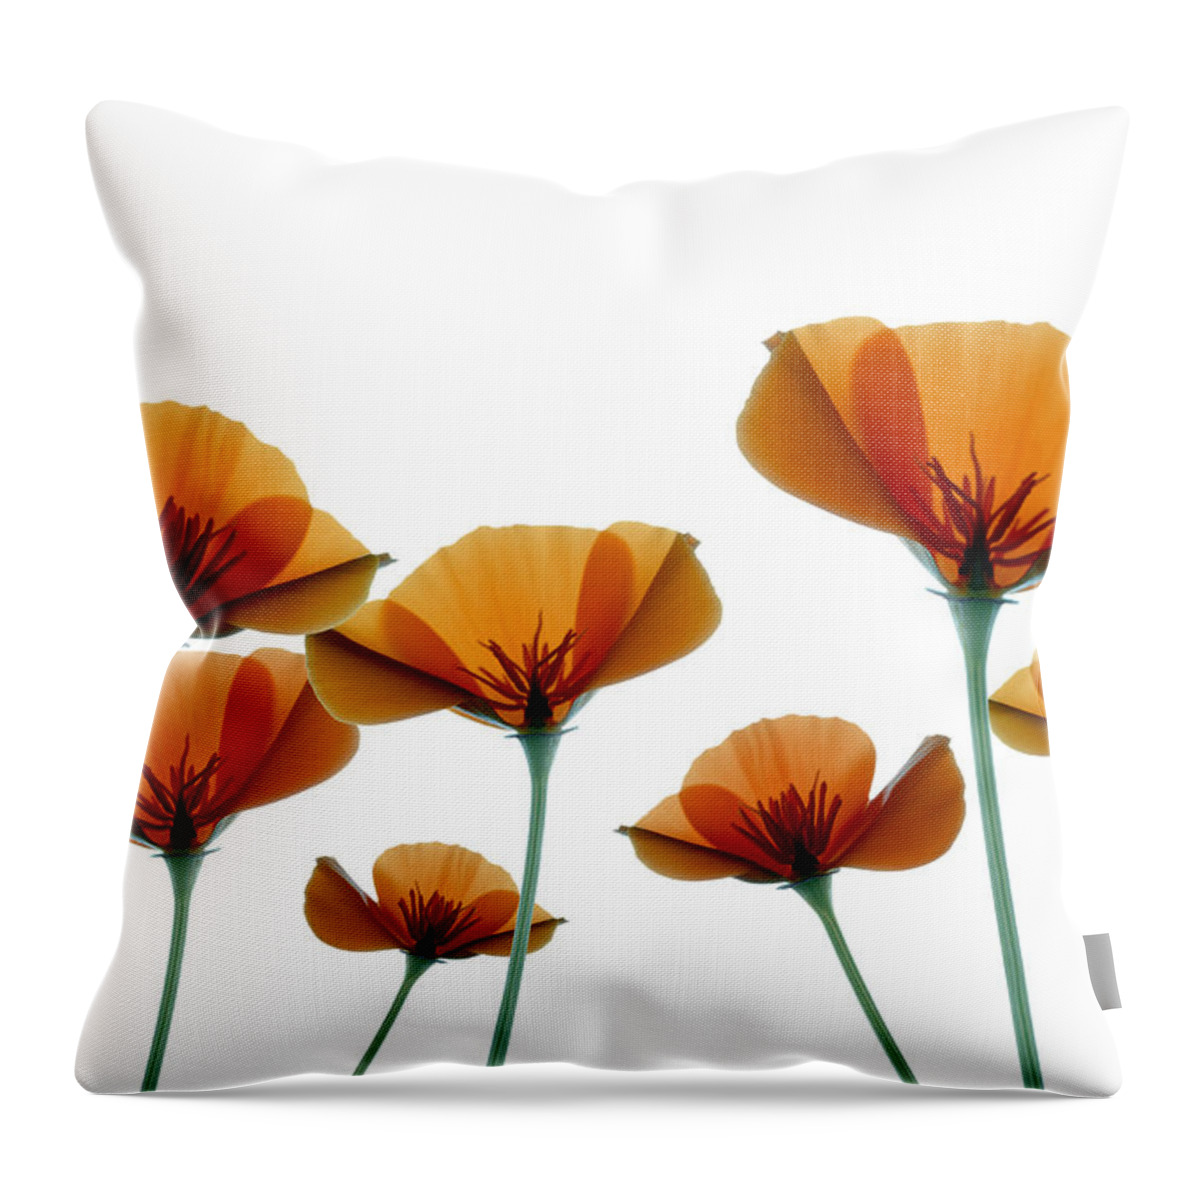 California Poppies Throw Pillow featuring the photograph Poppies by Marsha Tudor